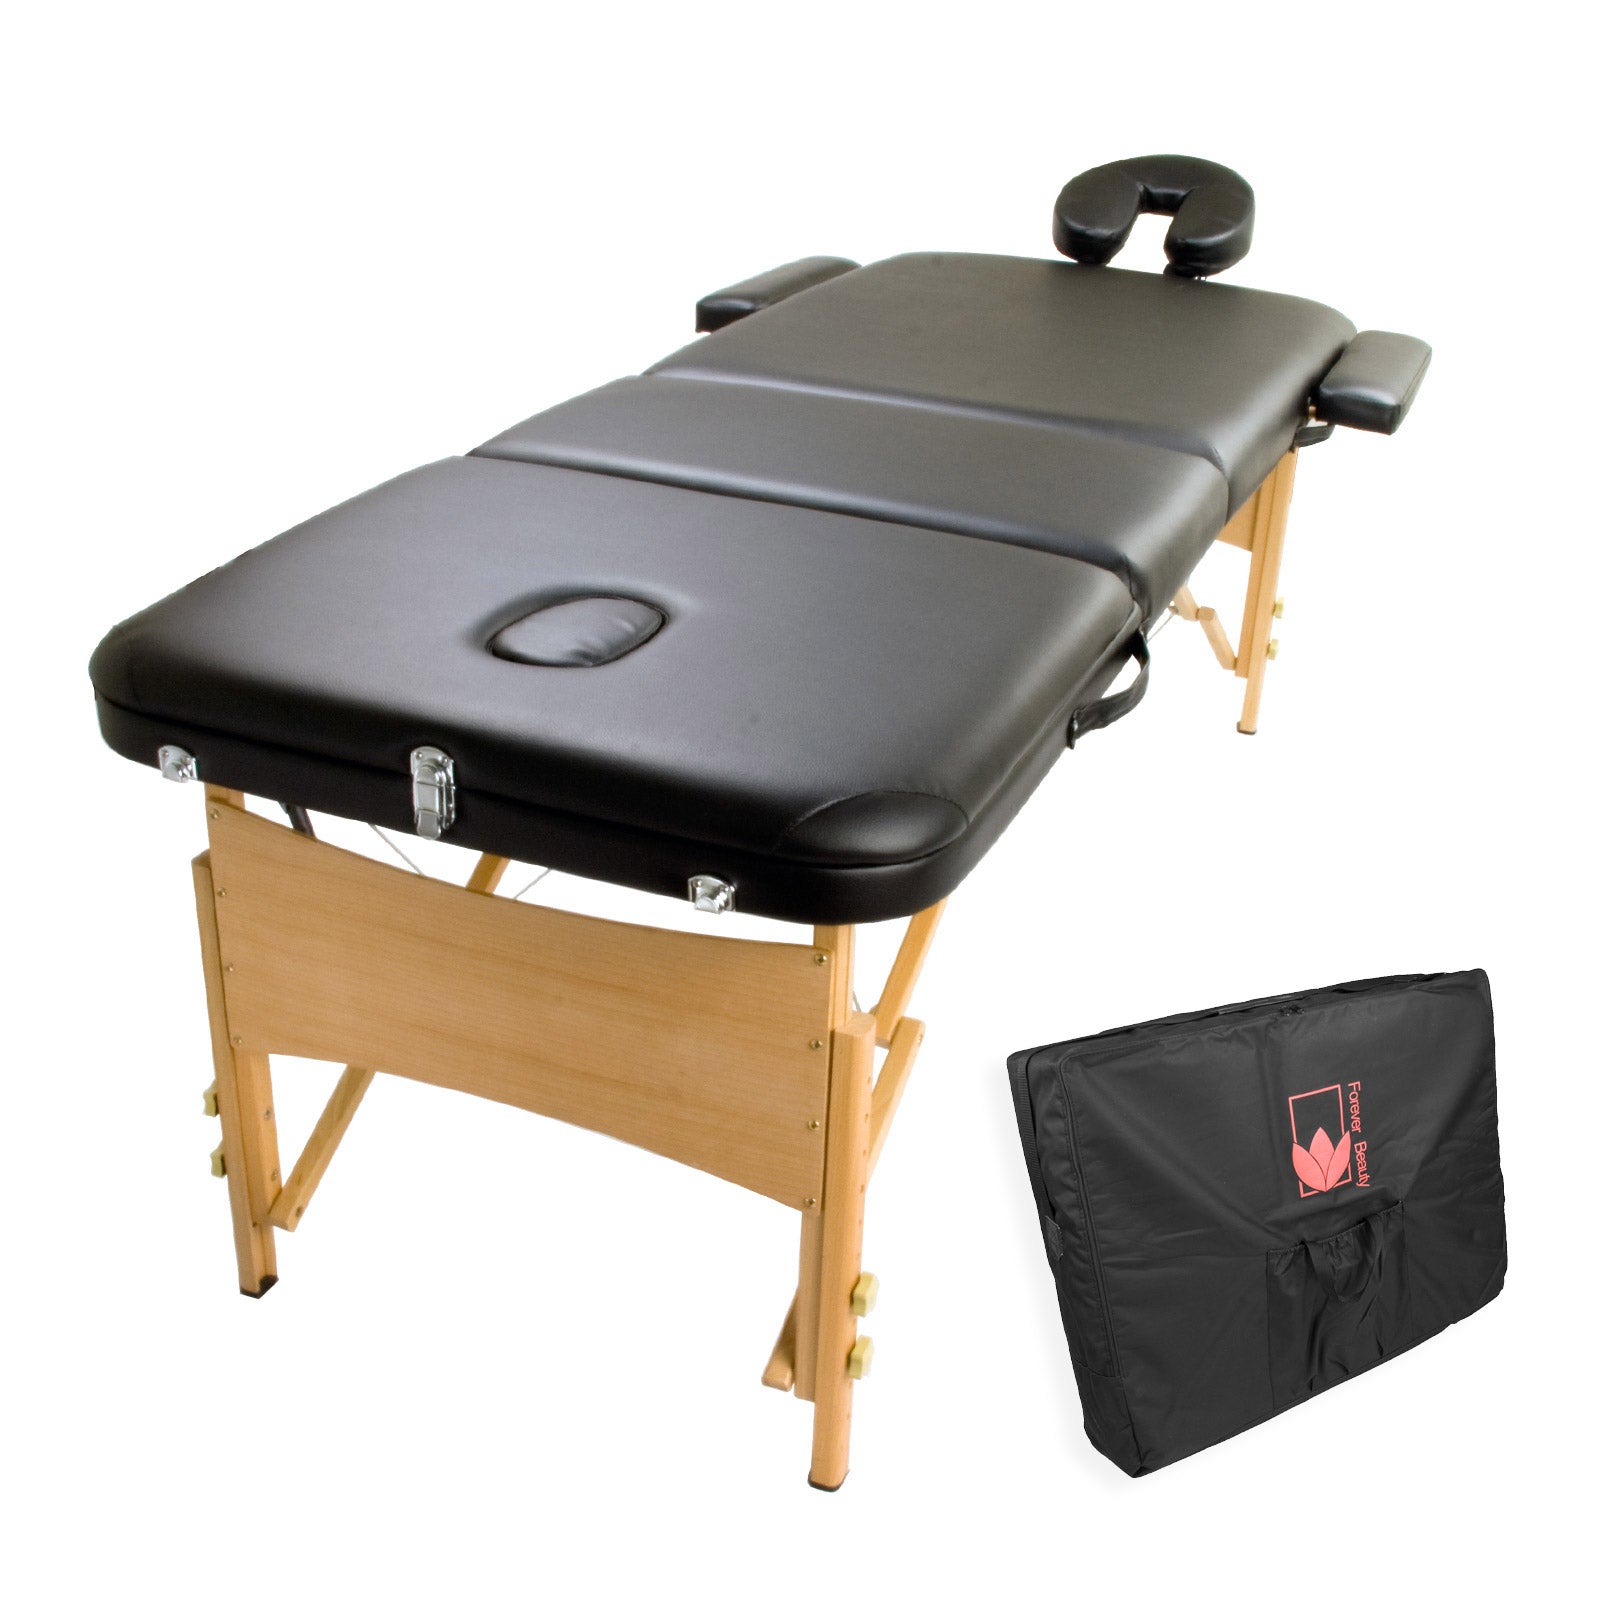 forever-beauty-black-portable-massage-table-bed-therapy-waxing-3-fold-70cm-wooden